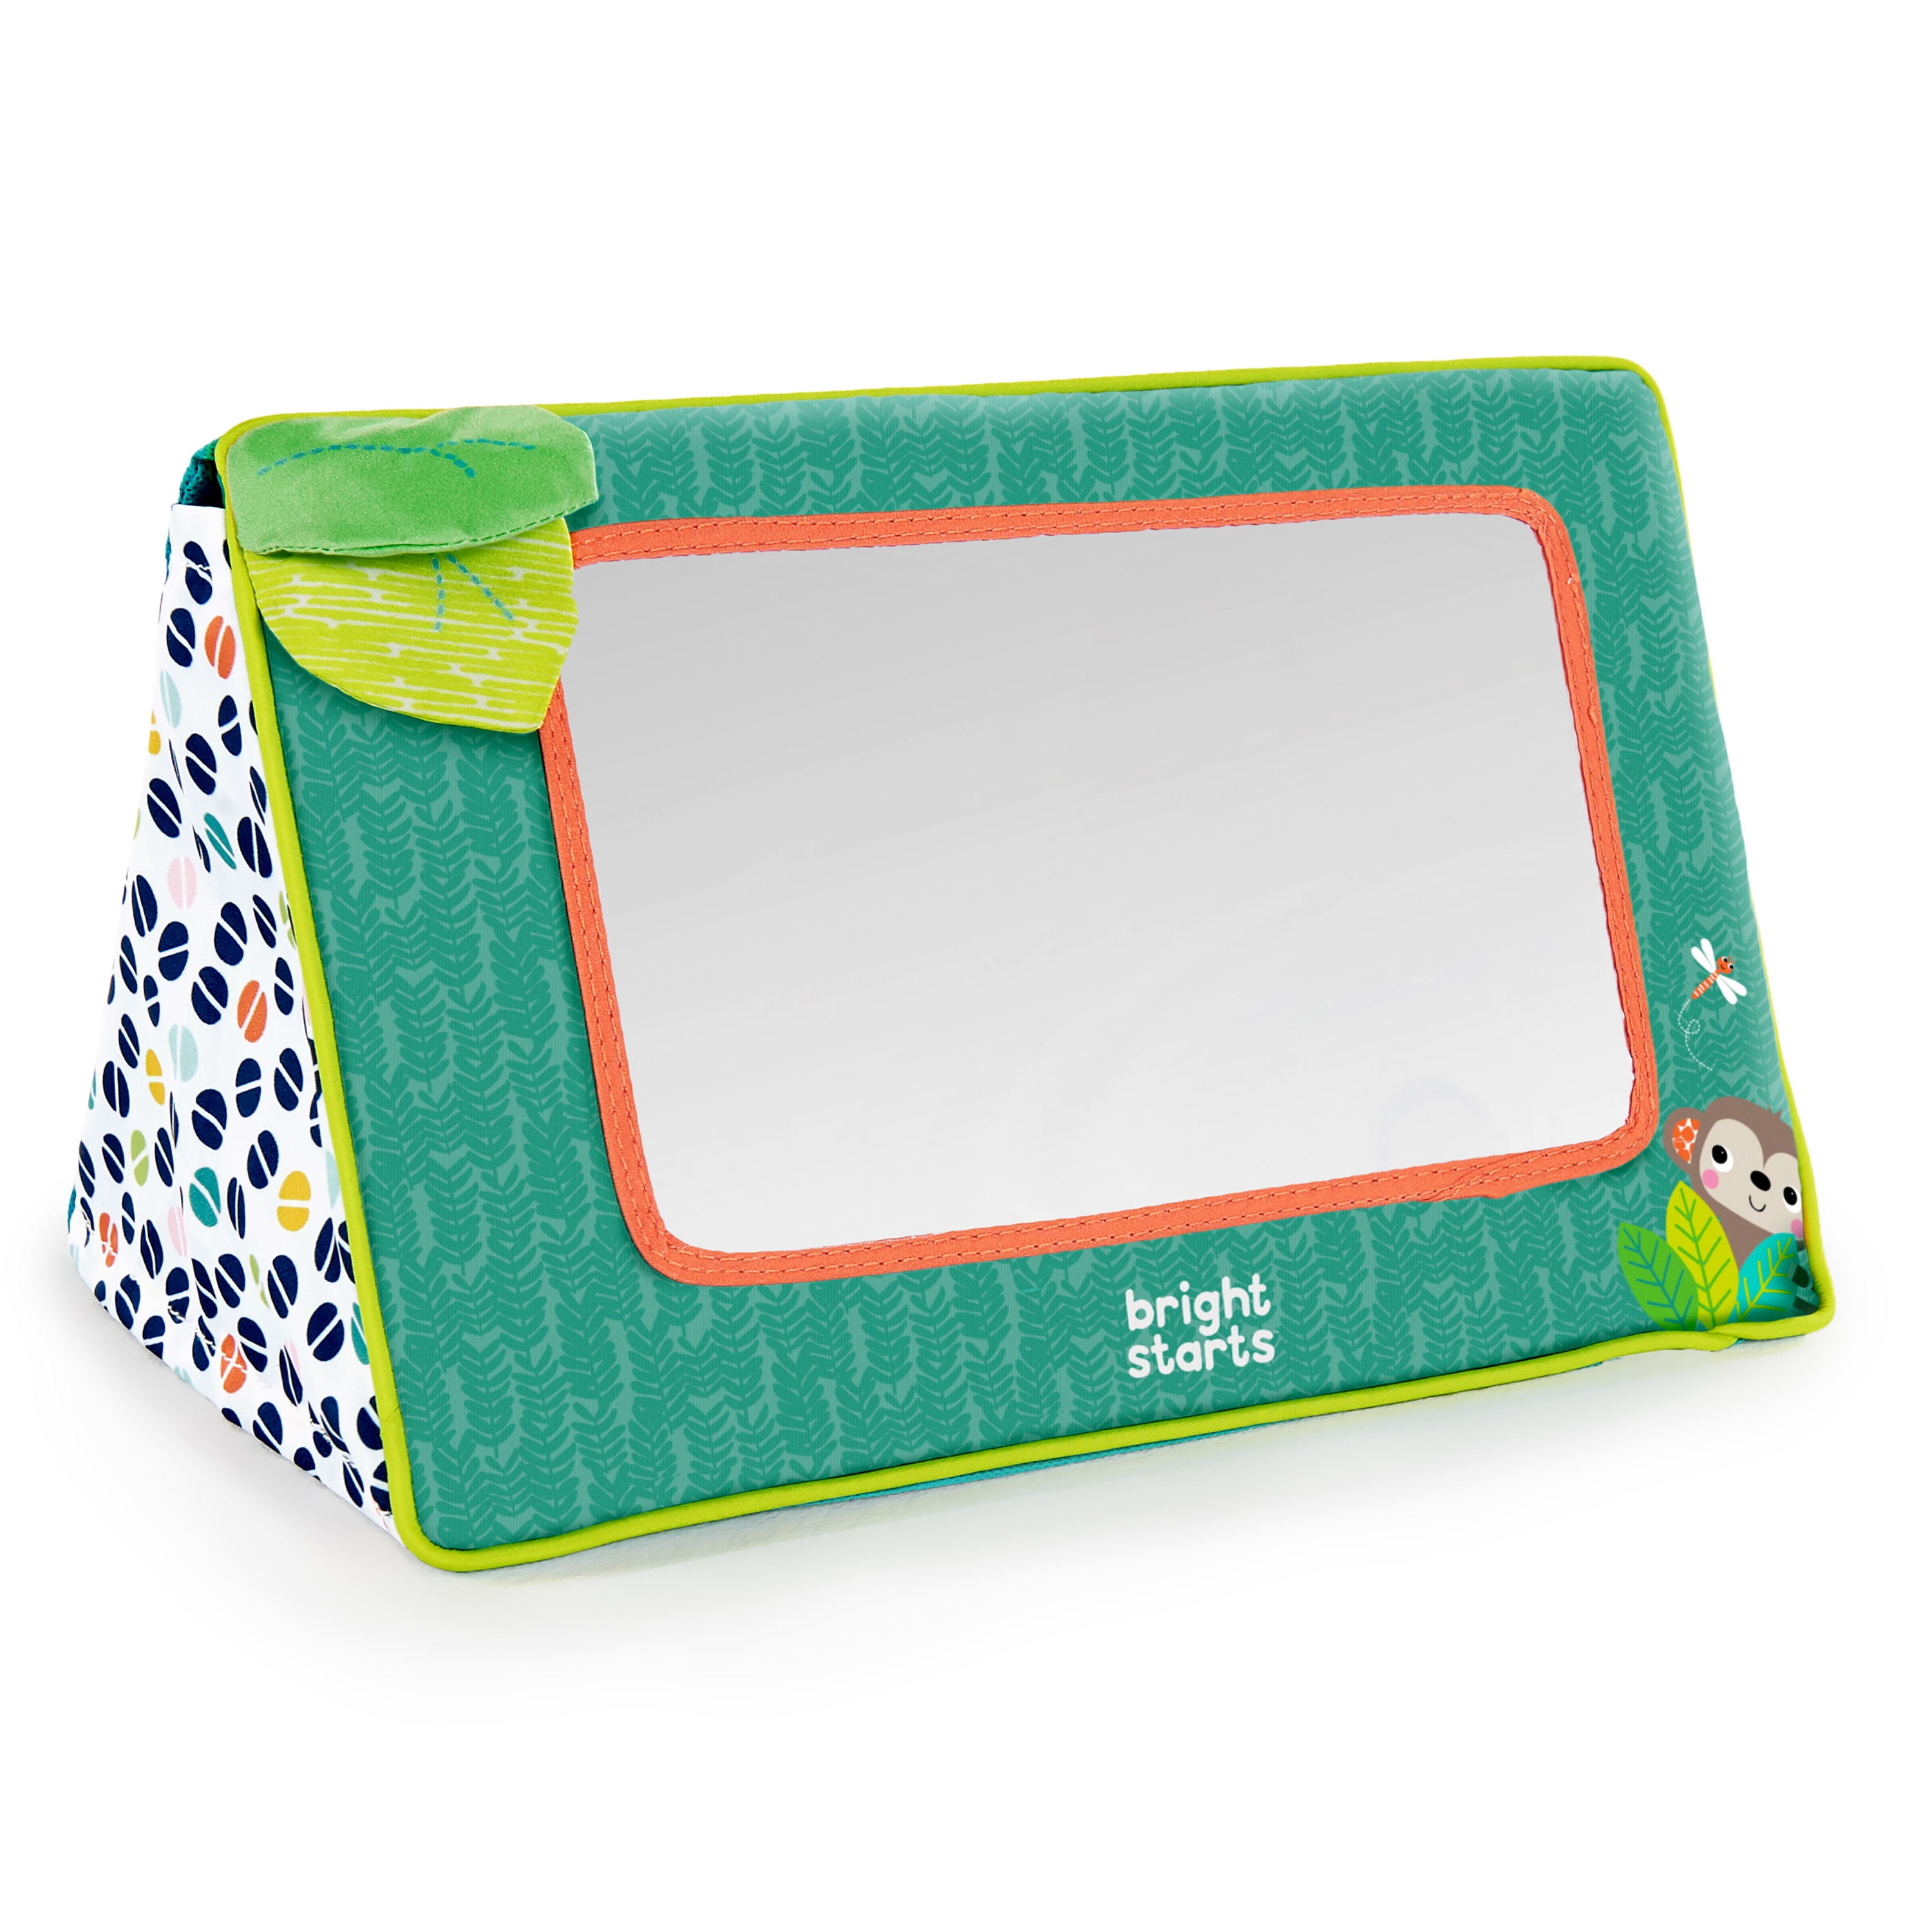 Child mirror with safari themed frame 20FMR006